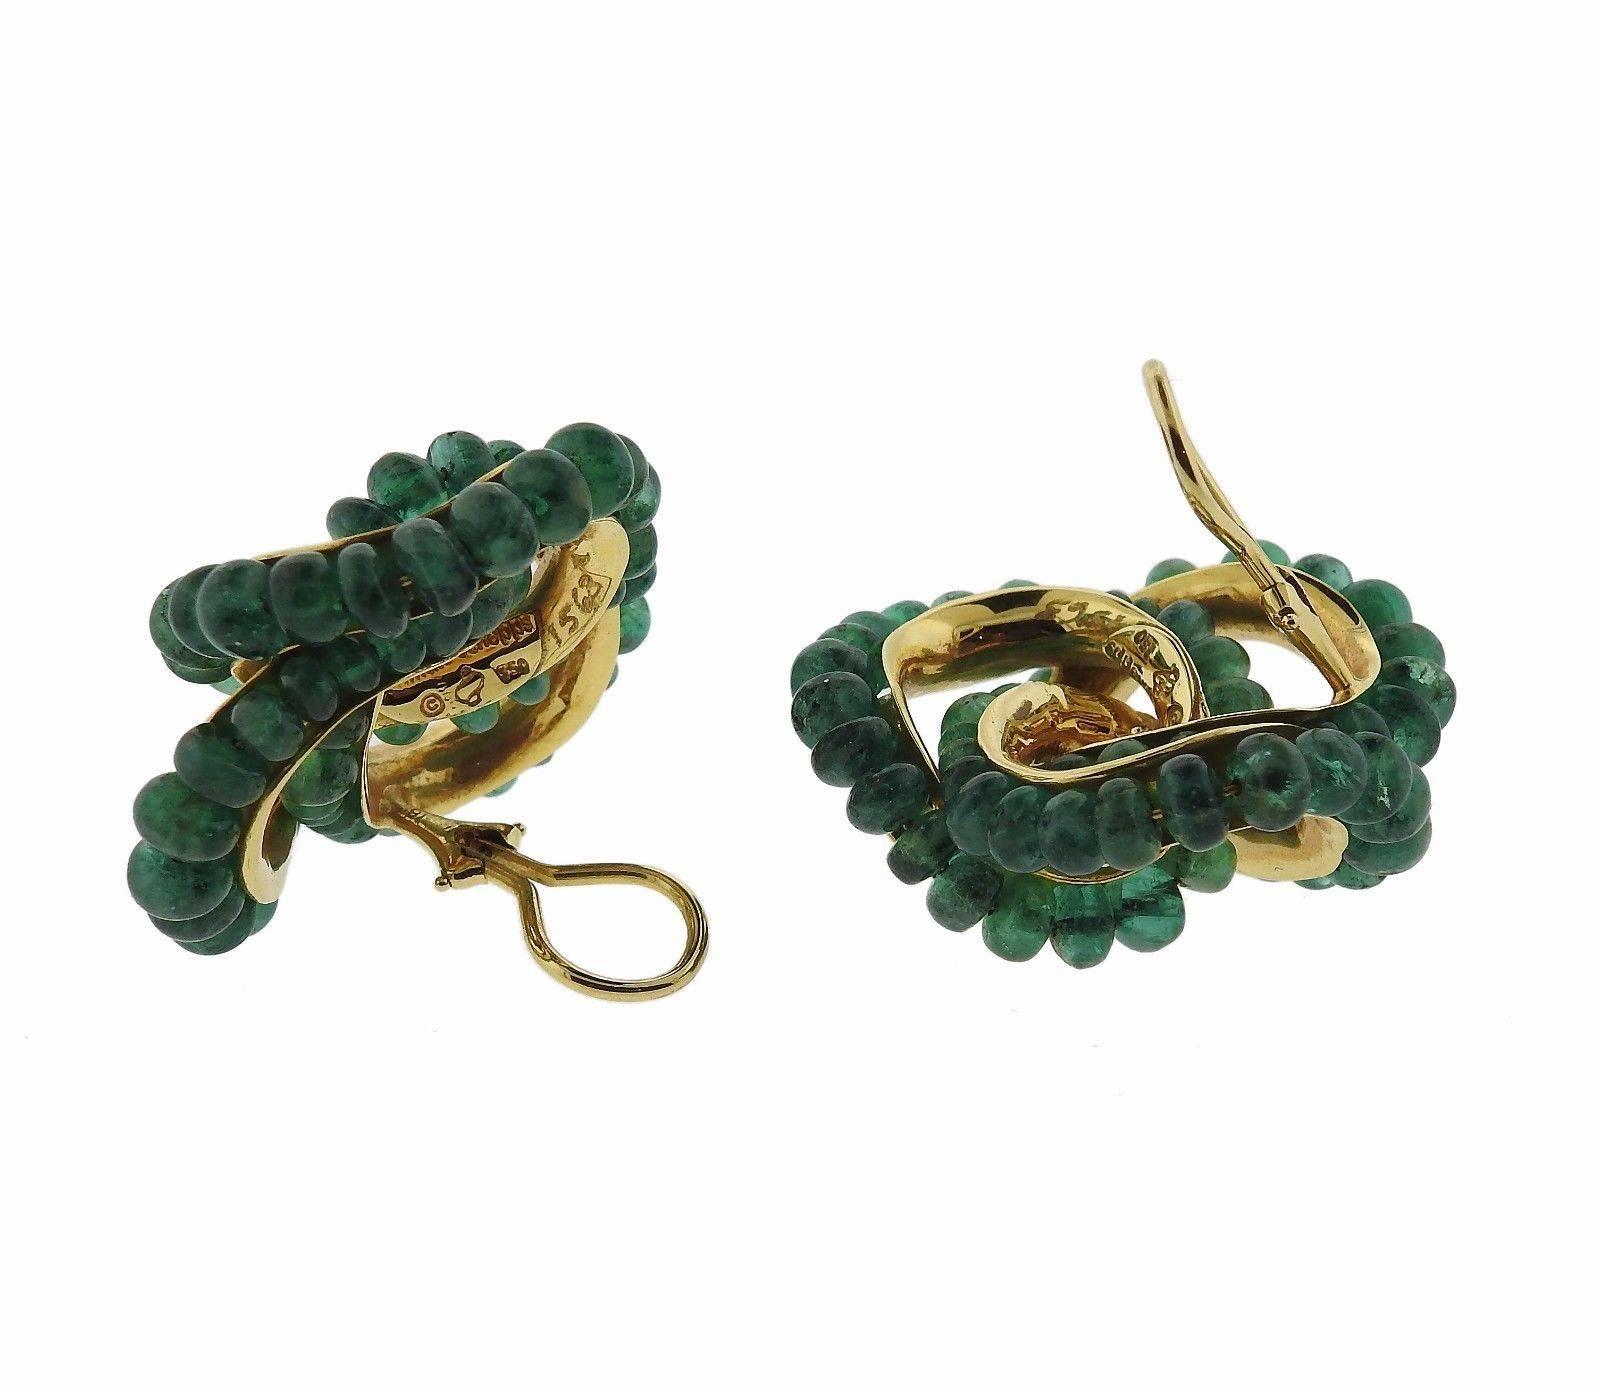 A pair of 18k yellow gold earrings set with emerald beads.  The earrings measure 37mm x 37mm and weigh 39.7 grams.  Marked: Seaman Schepps 750, maker's hallmark.